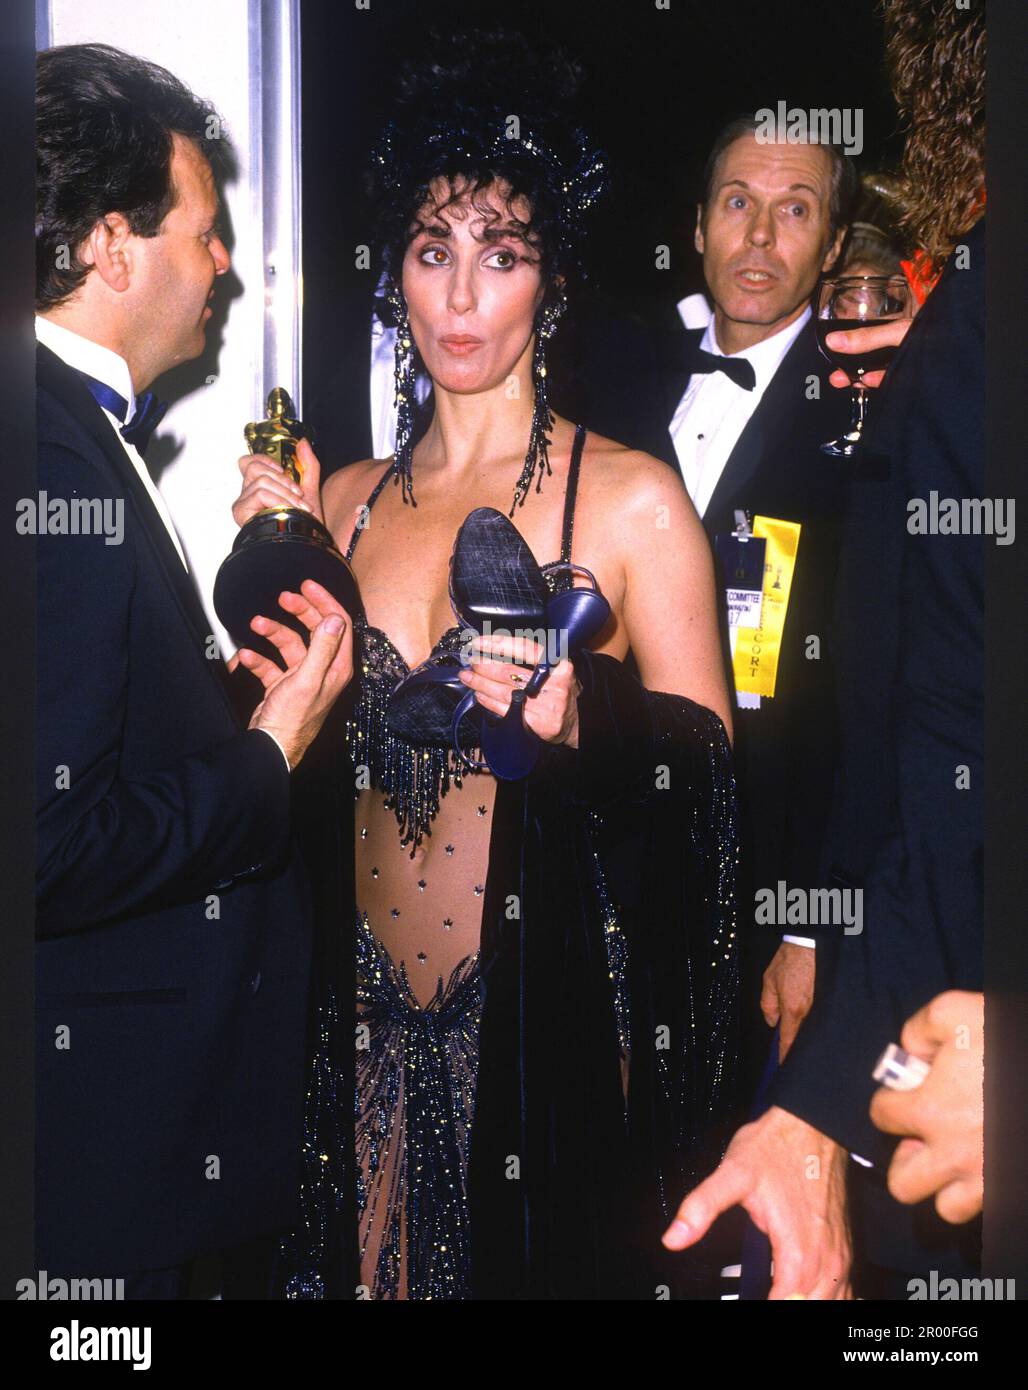 Cher Leaving the Academy Awards after winning ‘Best Actress’ for Moonstruck, 1988 Credit: Ron Wolfson  / MediaPunch Stock Photo